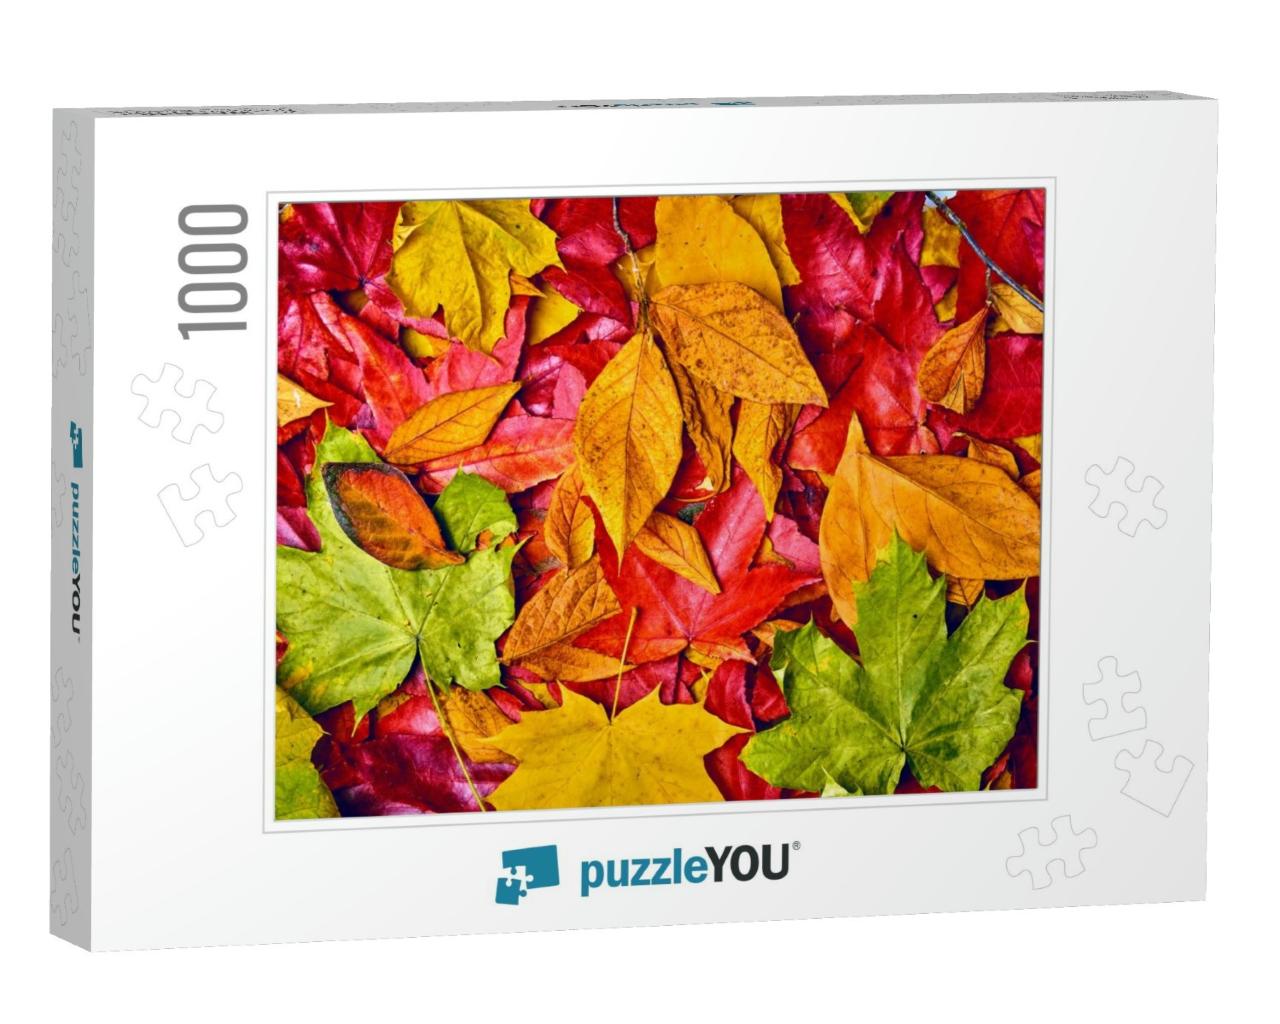 Background of Autumn Leaves. Autumn Background... Jigsaw Puzzle with 1000 pieces